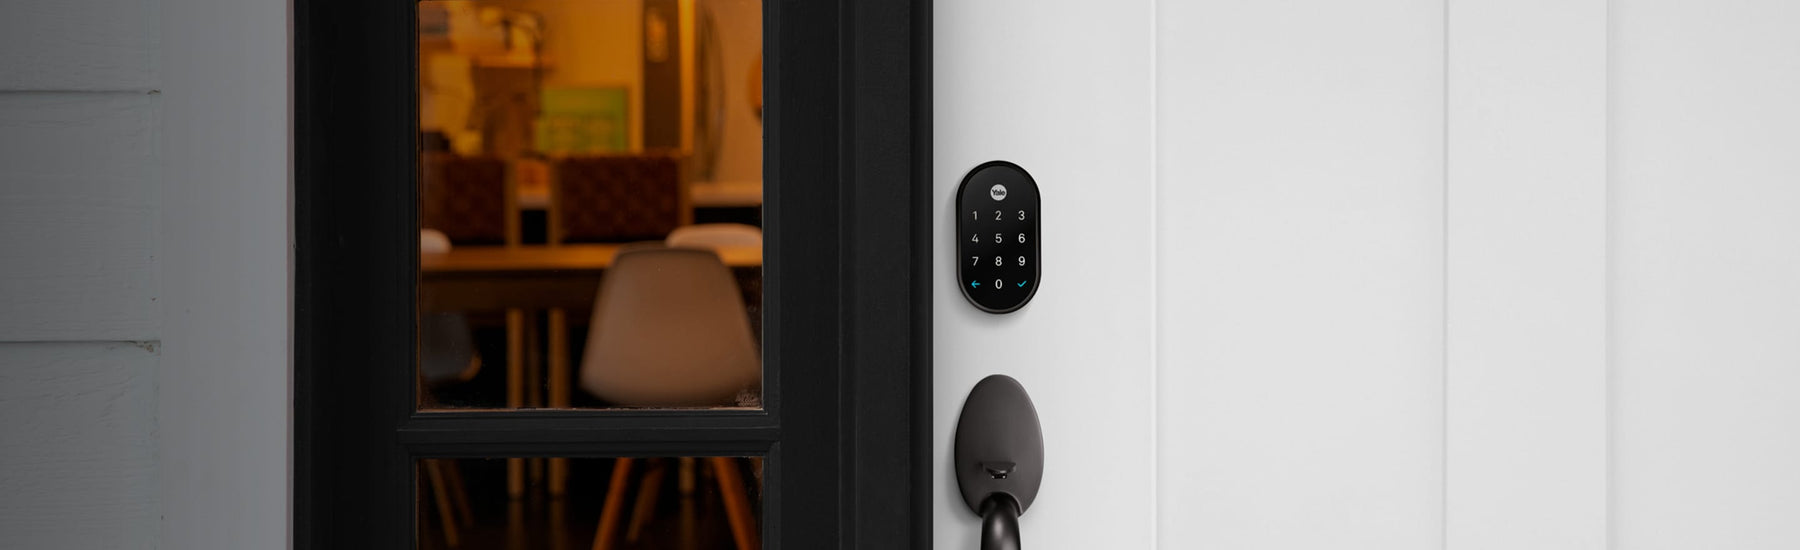 Nest x Yale lock on door showing secure and tamper proof 